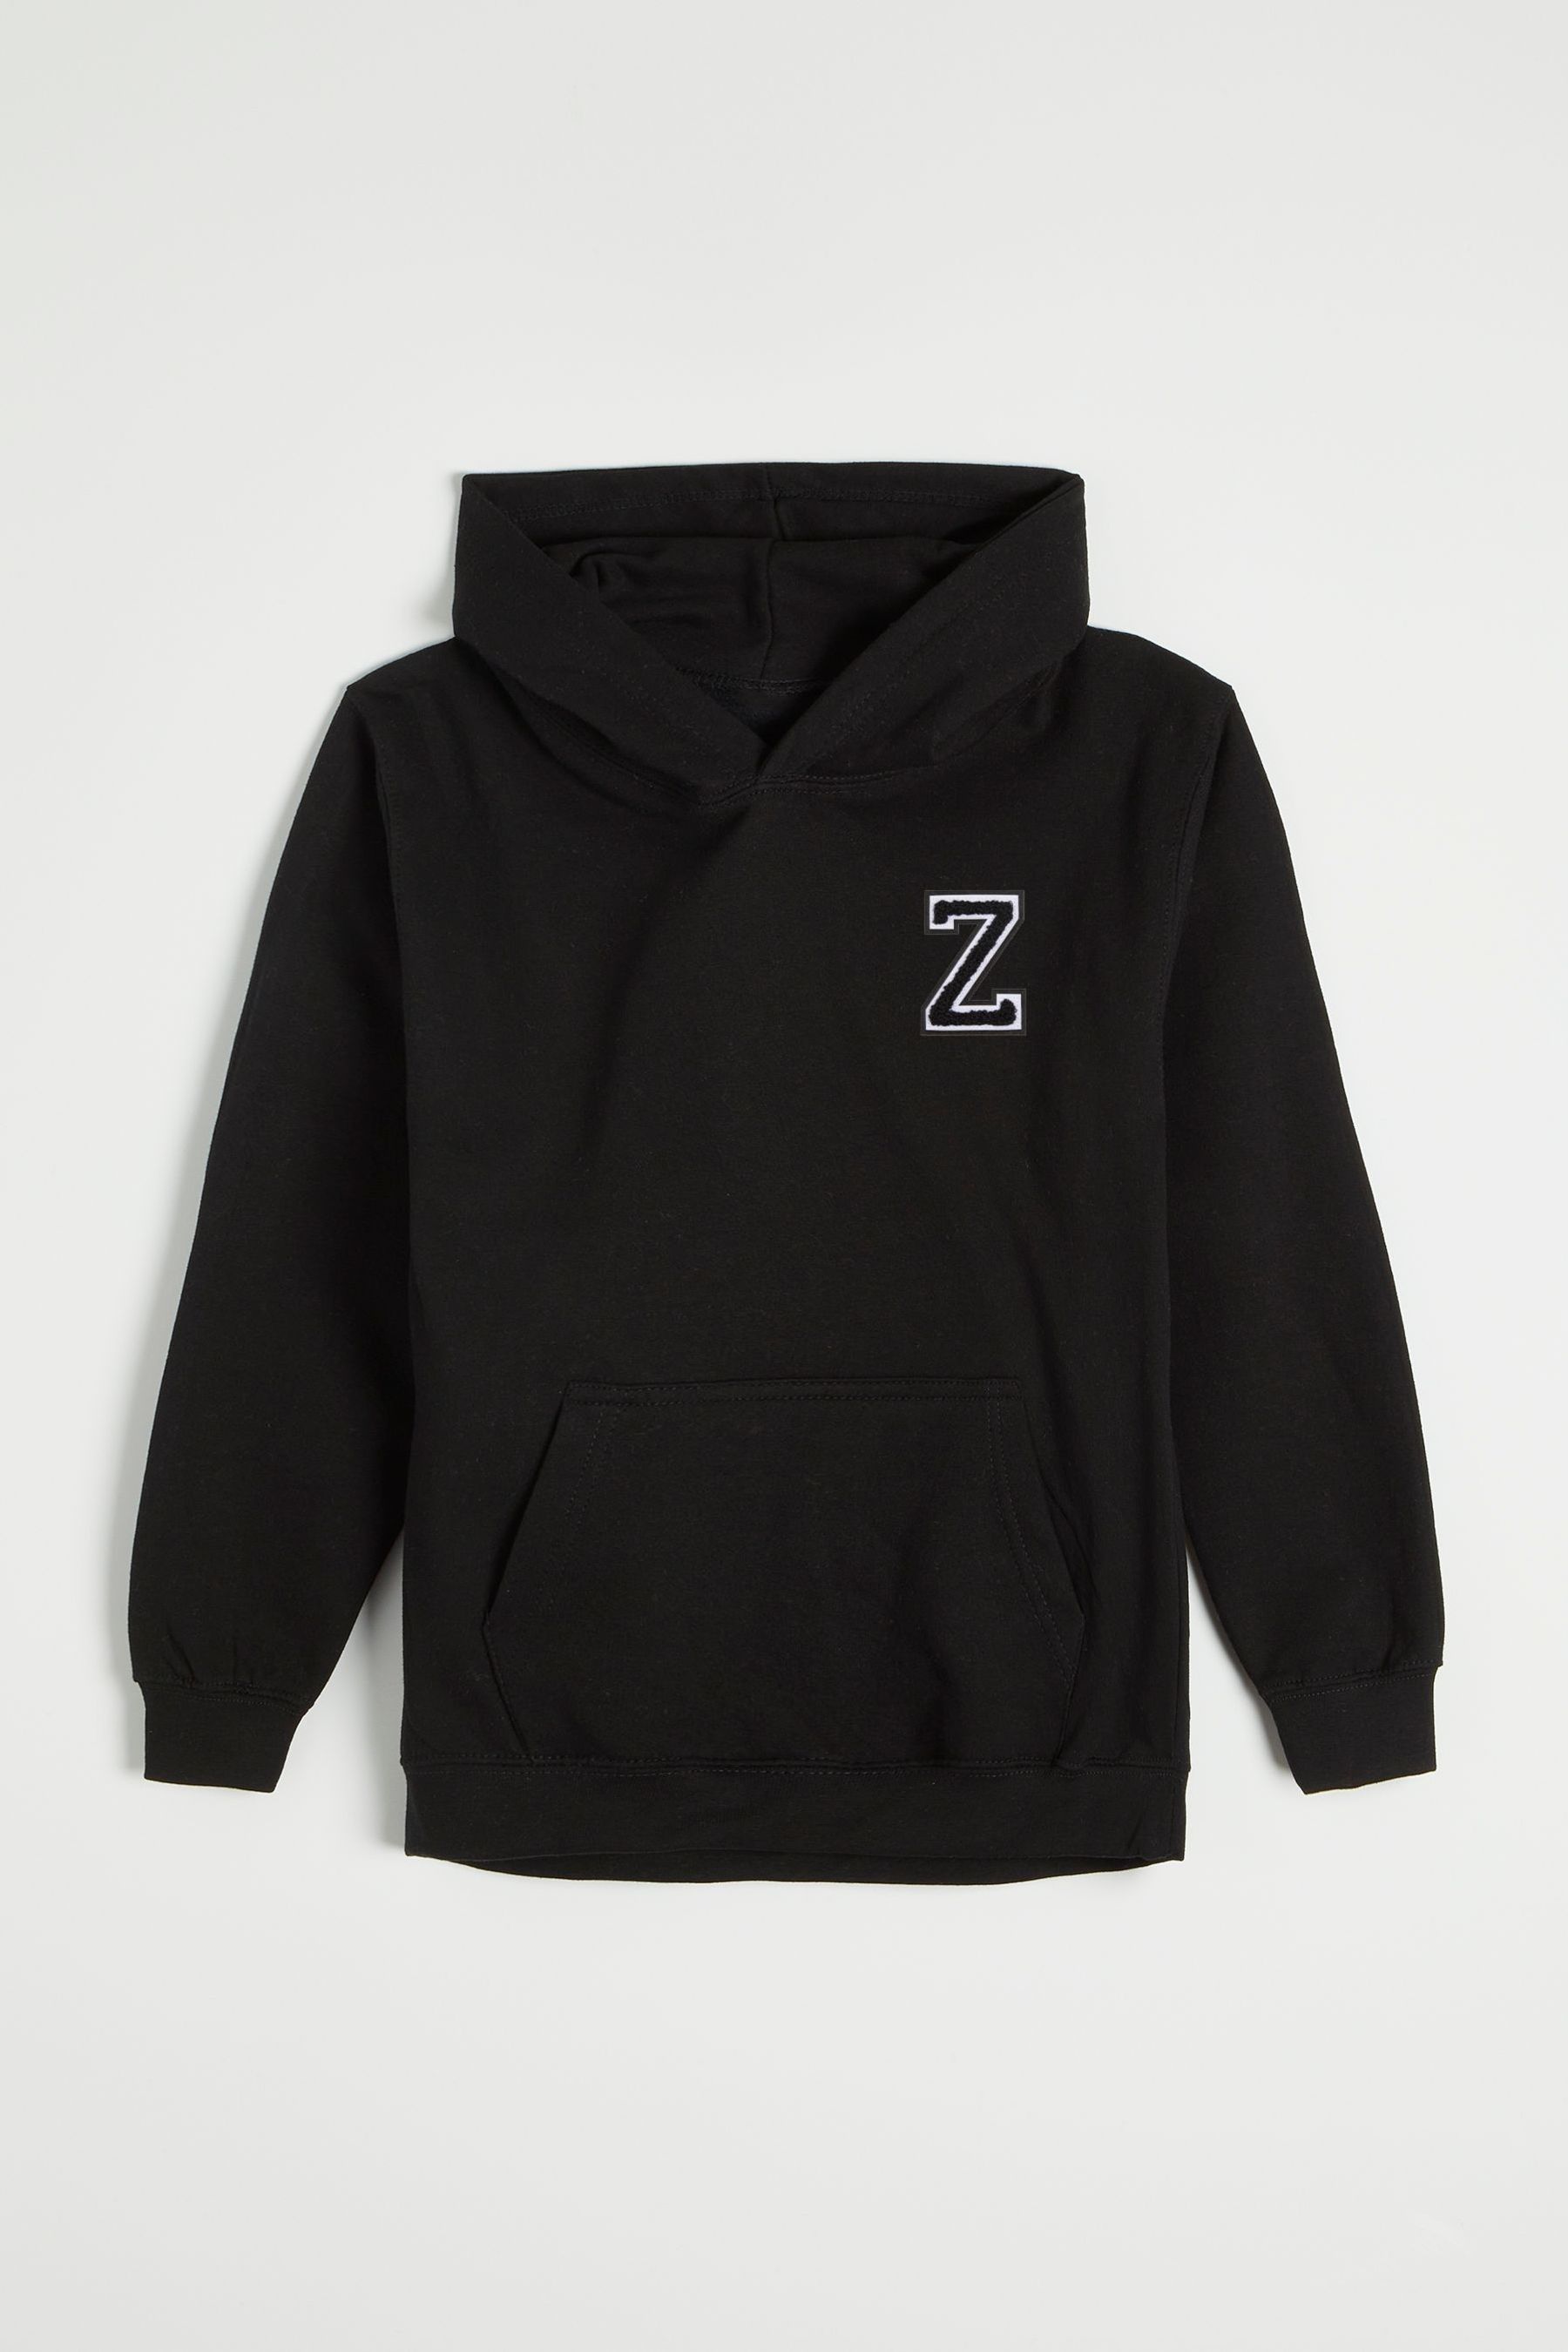 Buy Personalised Monogrammed Hoodie by Alphabet from the Next UK online ...